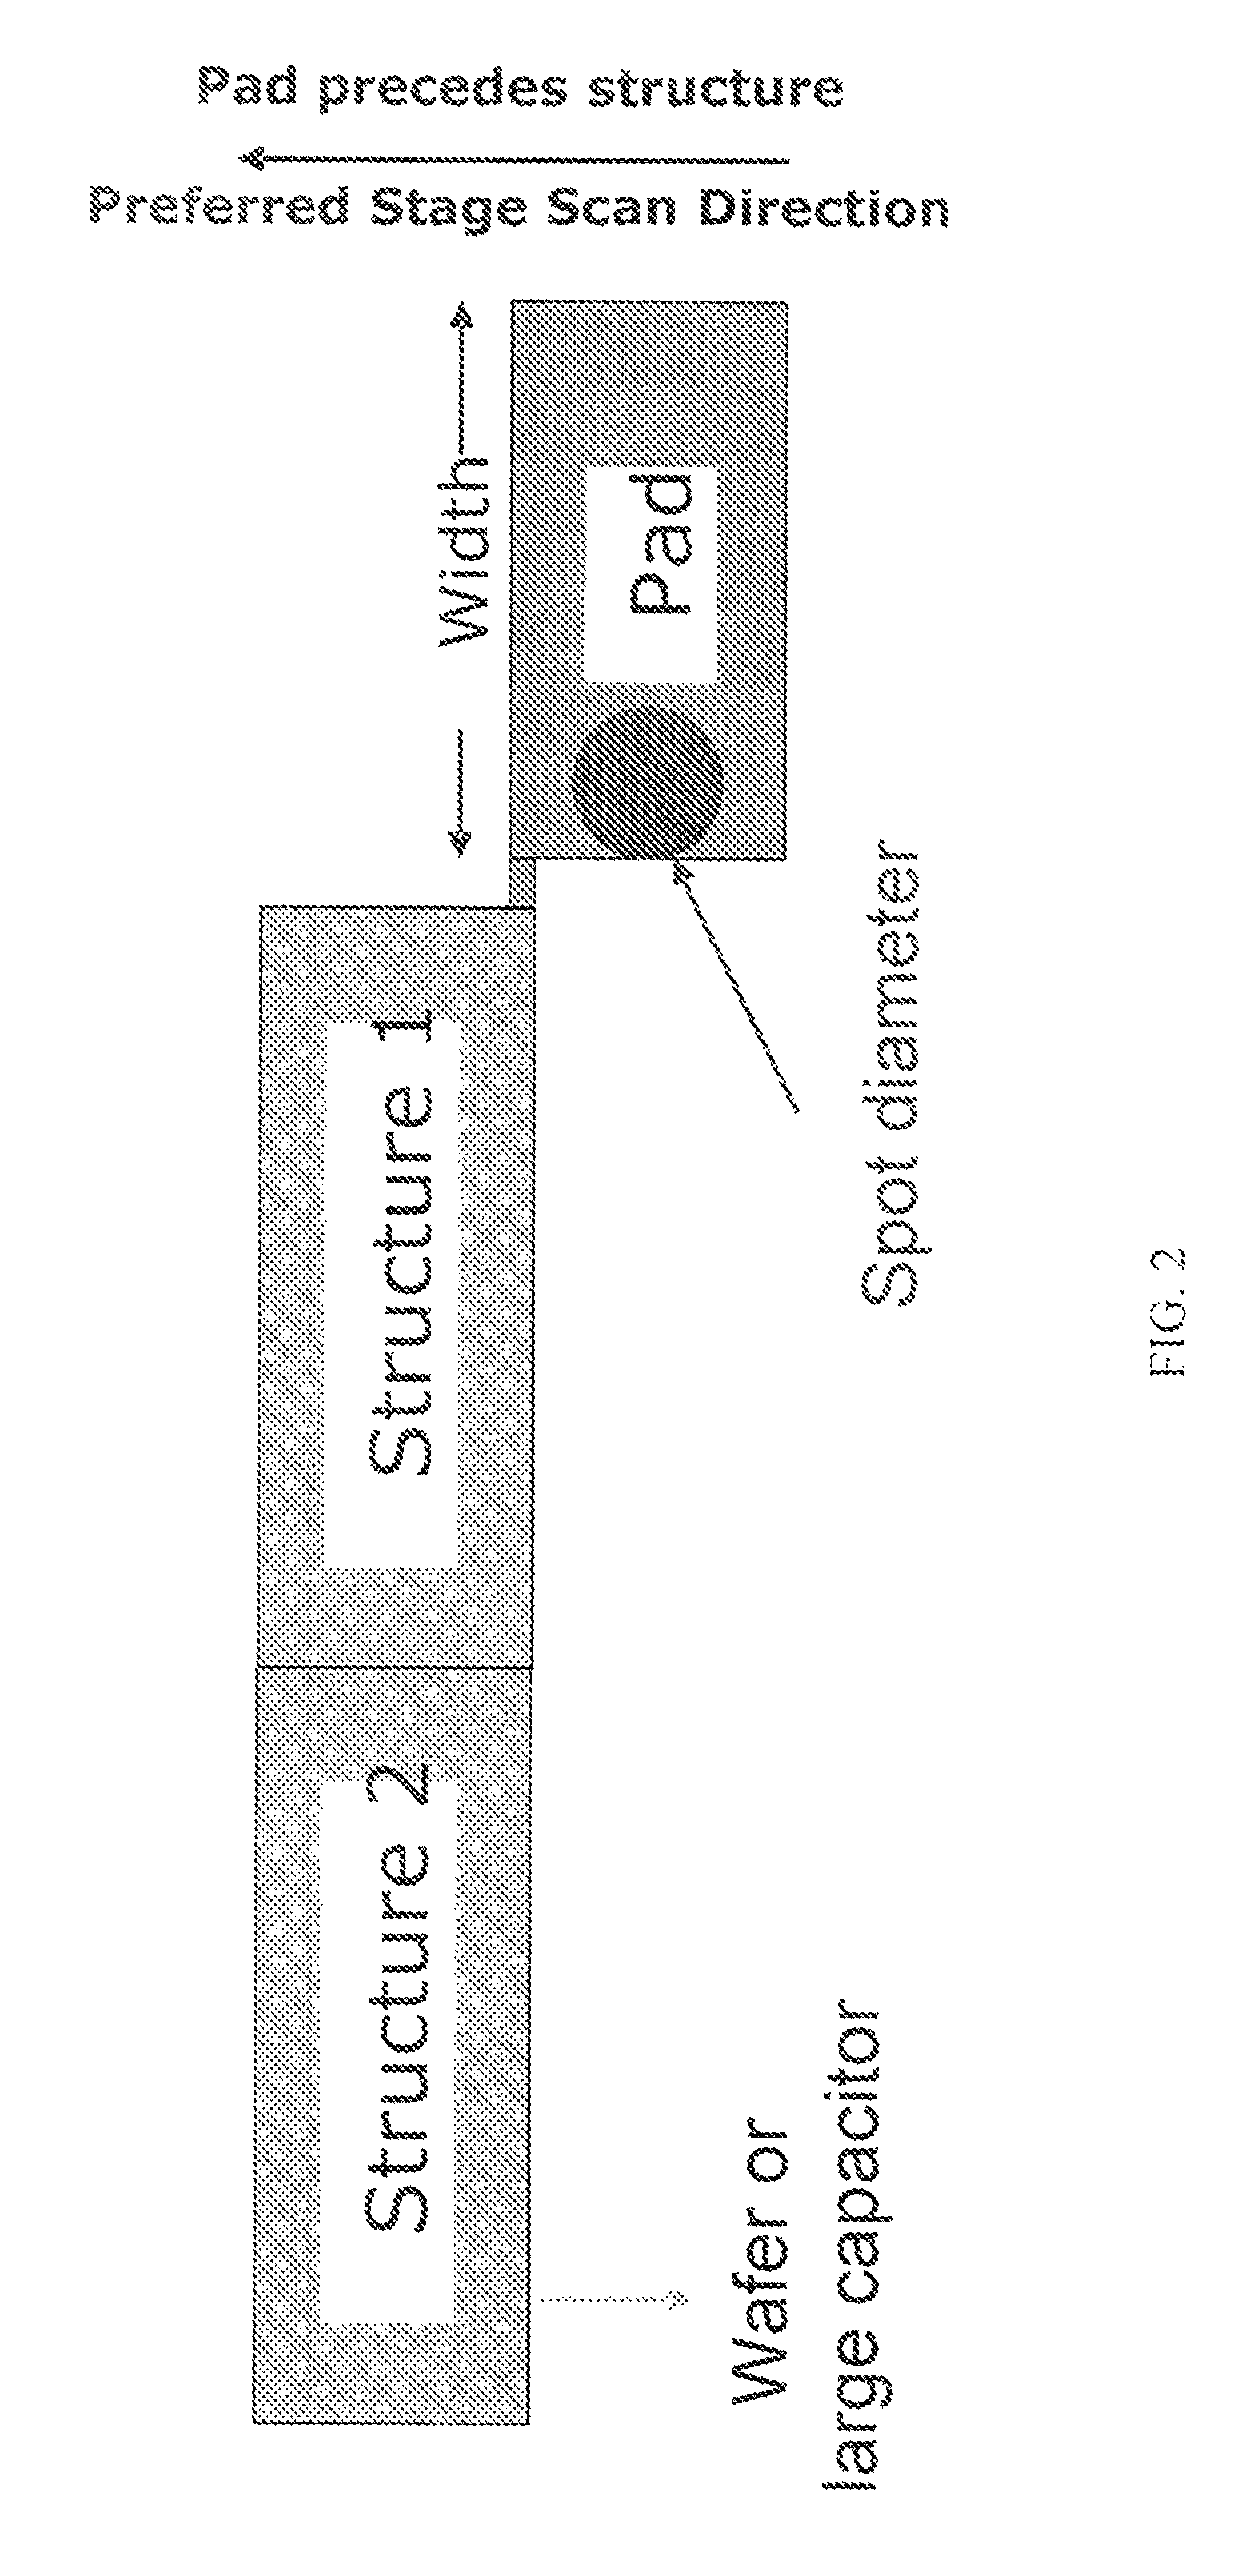 Apparatus and method for test structure inspection